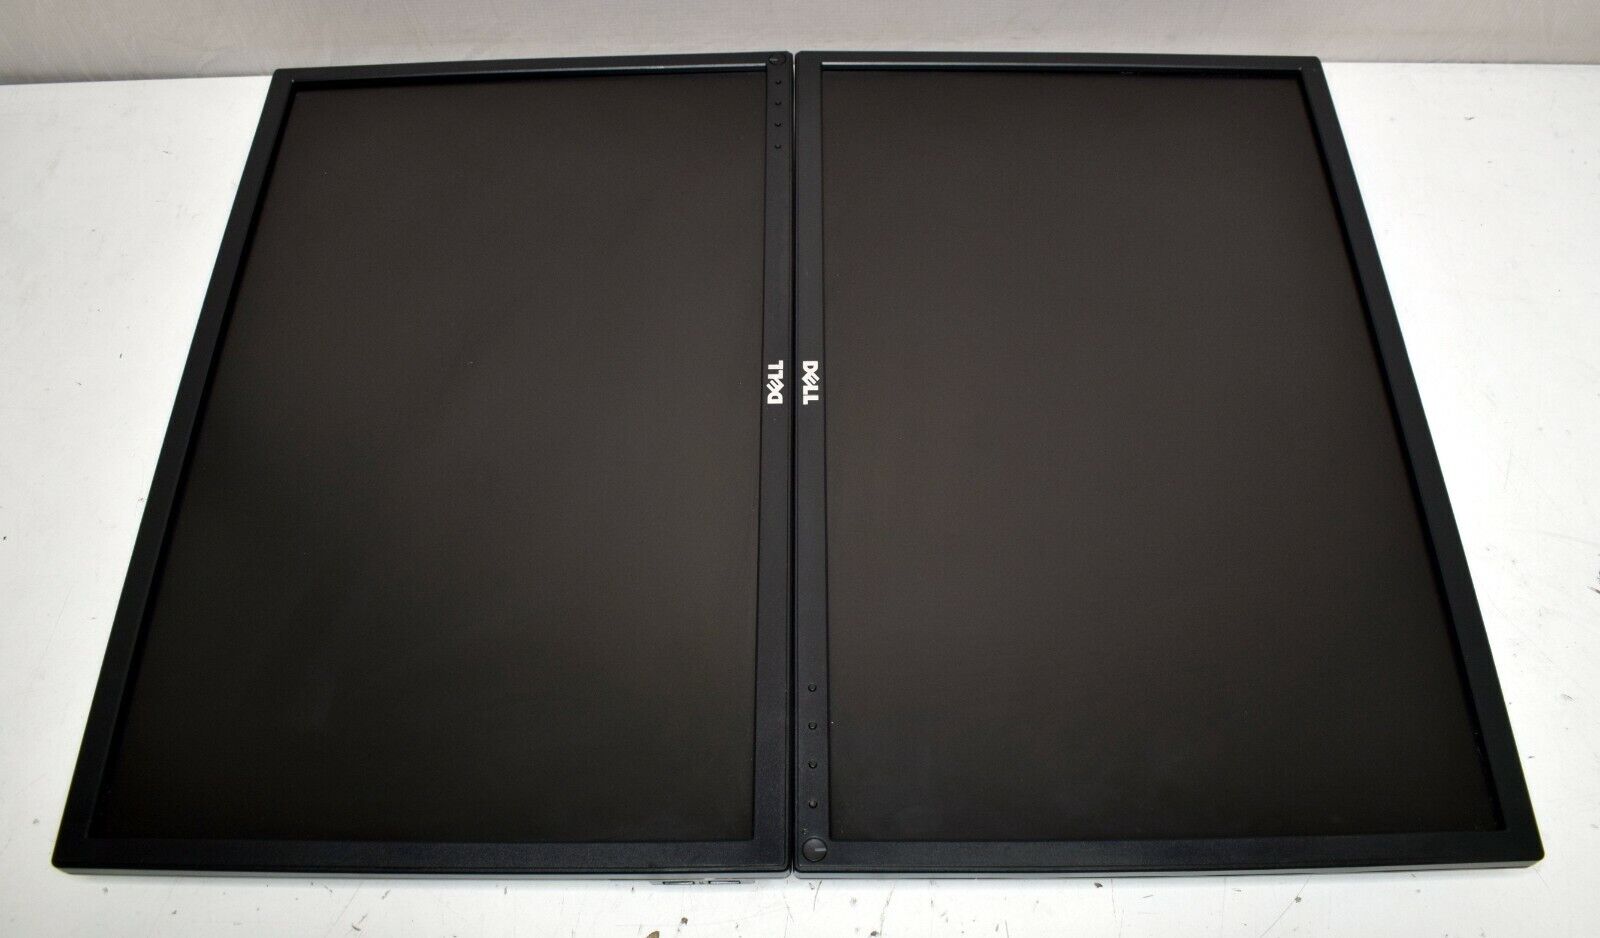 Lot of (2) Dell P2217 22" LED Monitor LCD Computer Screen Display No Stand Dell P2217